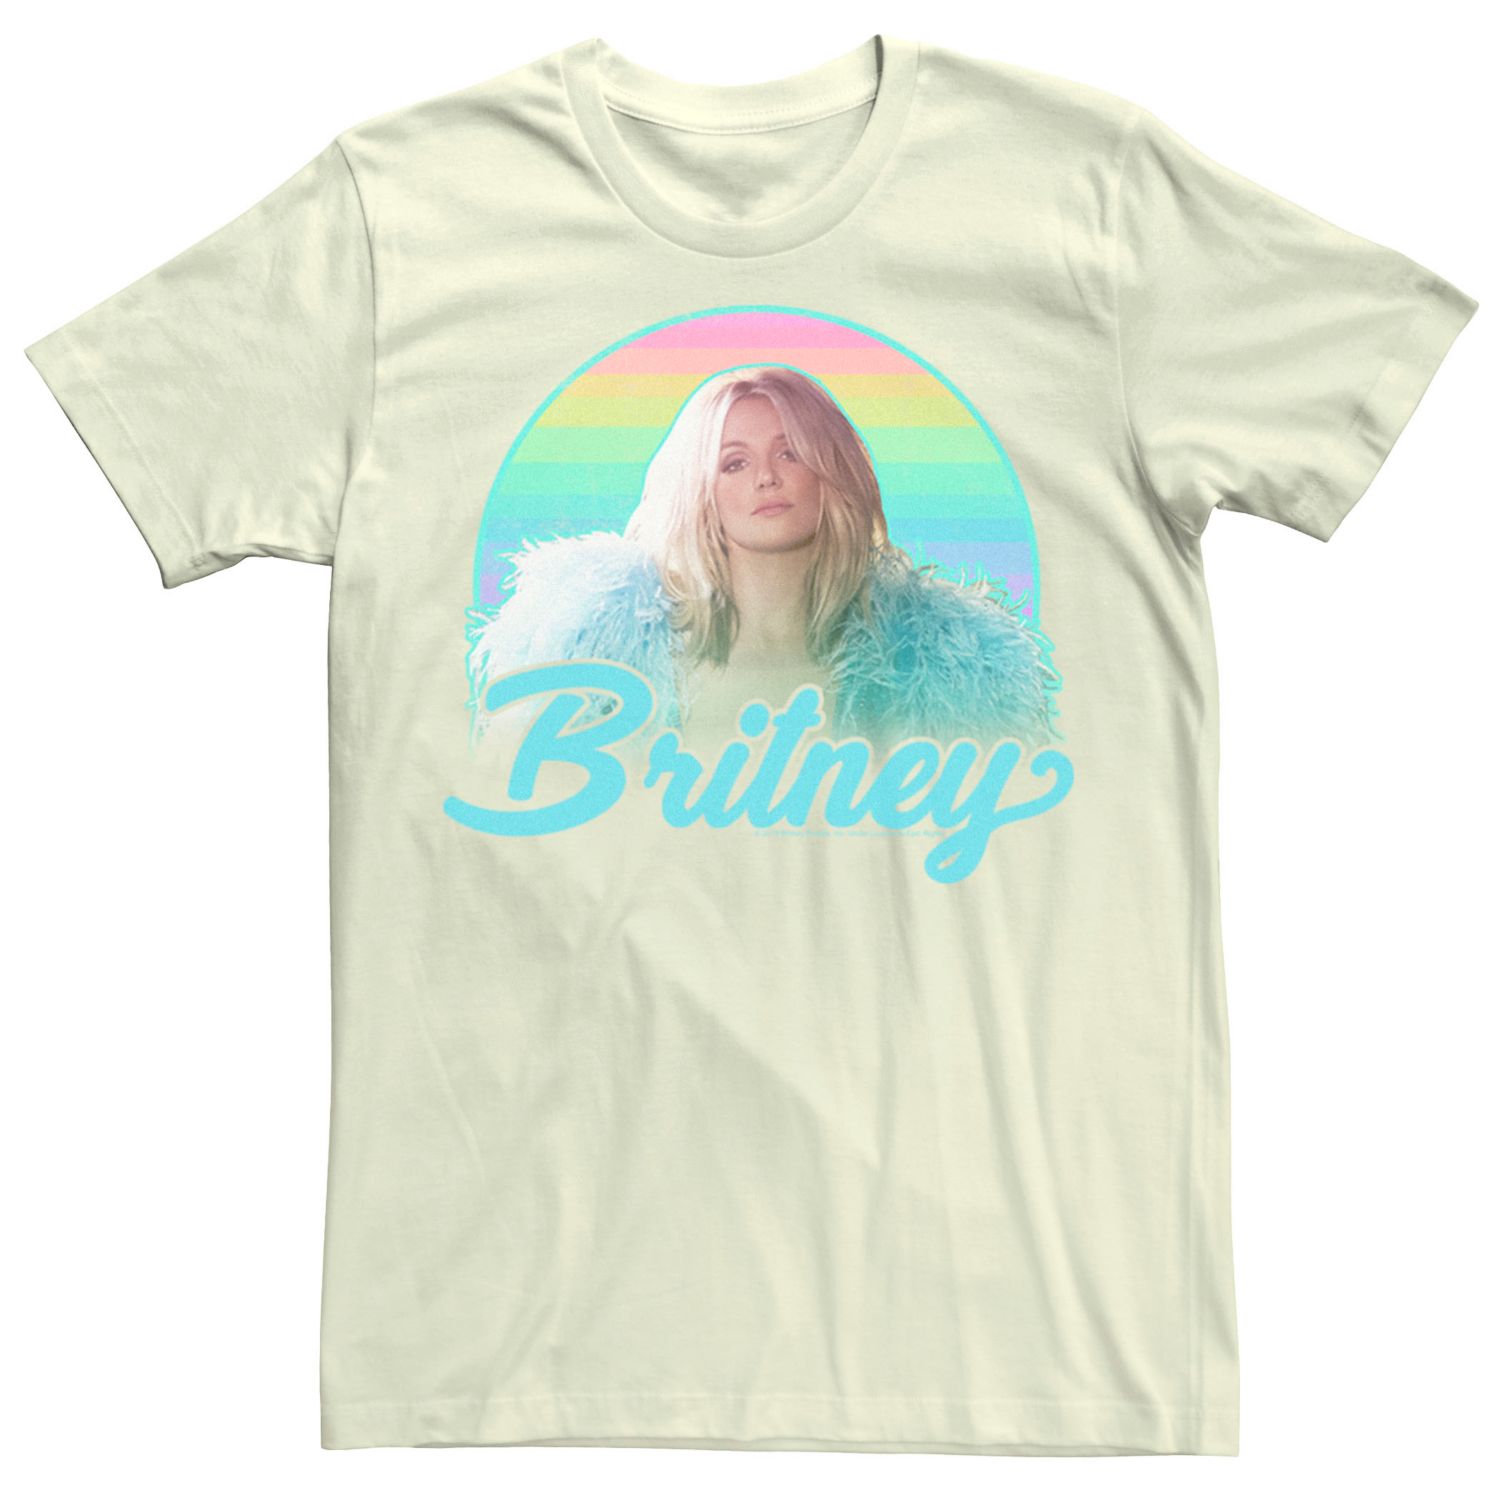 Image for Licensed Character Men's Britney Spears Pastel Rainbow Portrait Tee at Kohl's.